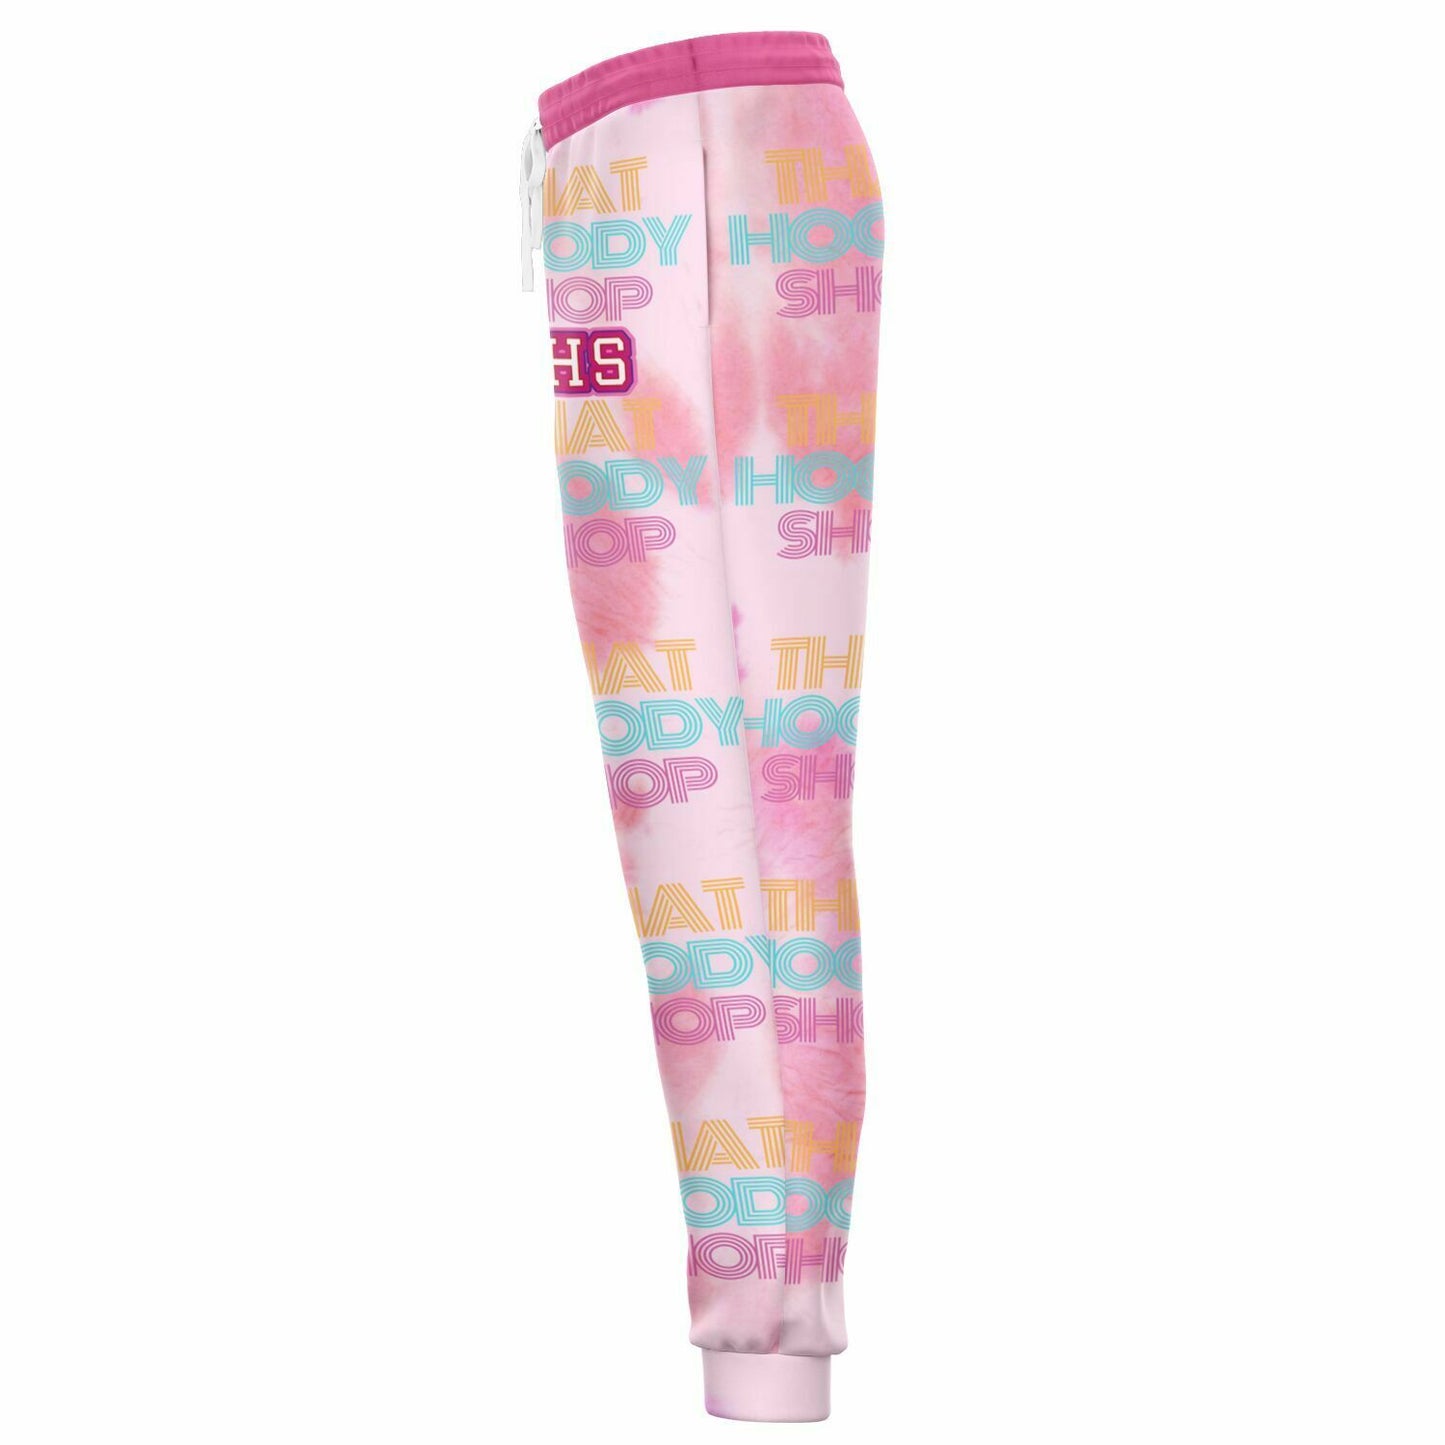 That Hoody Shop 1976 Pink Tie-Dye Eco-Poly Unisex Joggers